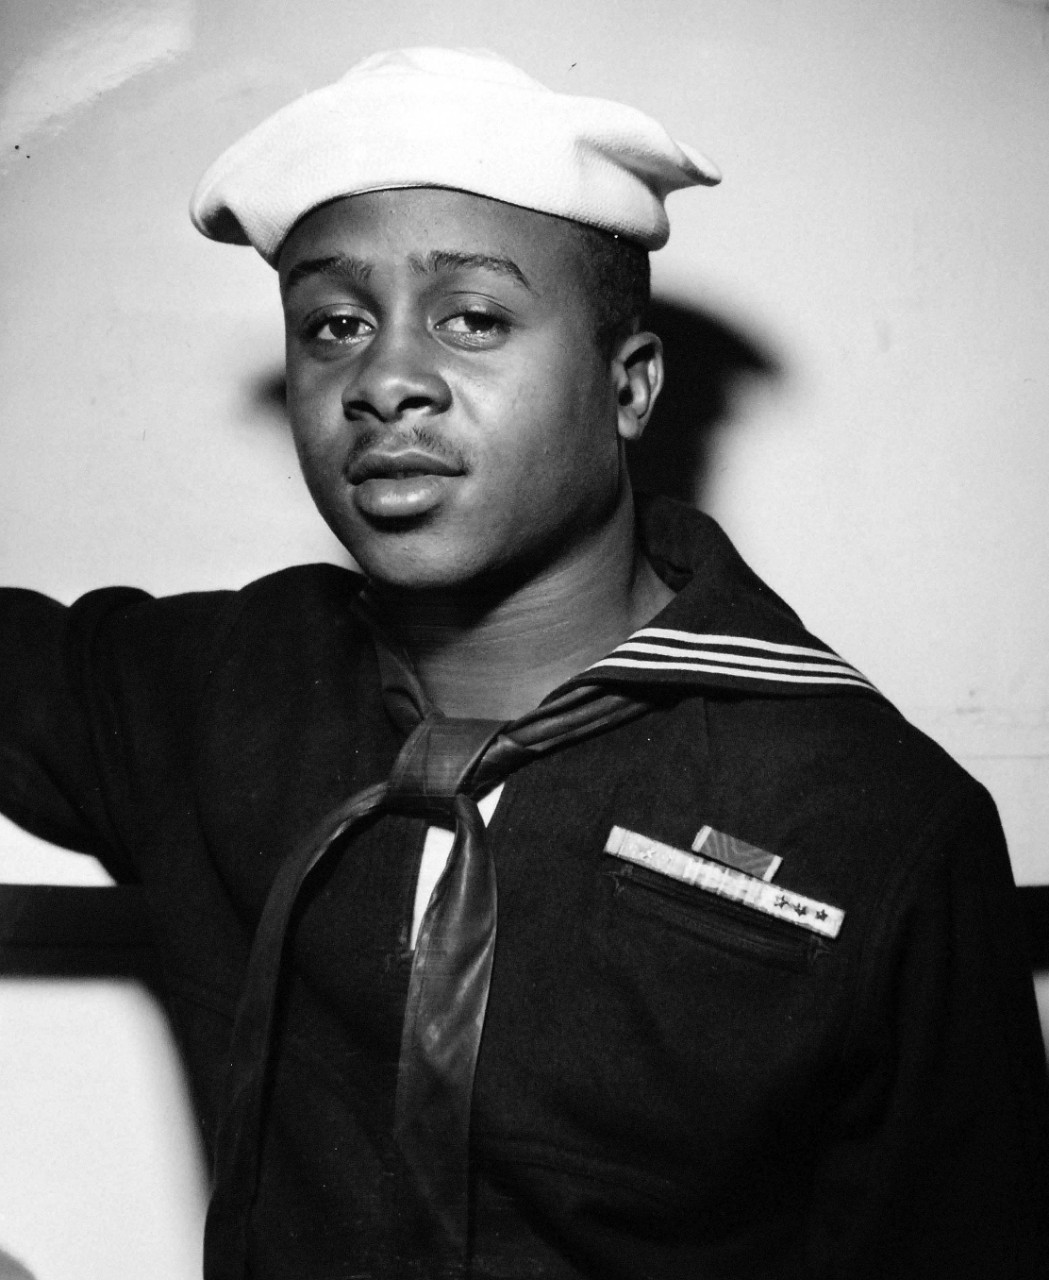 208-NP-8FF-1:  Steward's Mate Eli Benjamin, 1944.    African-American gunner, who stayed at his gun until a Japanese plane crashed into the gun position, was presented the Bronze Star medal at ceremonies on board USS Intrepid (CV-11).  At the direction of Vice Admiral Marc A. Mitscher, the award was presented to Steward’s Mate Eli Benjamin, who was cited for “extraordinary heroism.”  Benjamin and five other African-American steward’s mates had volunteered to man a 20mm gun board the carrier.  When under attack, Benjamin and his mates continued firing their gun at a flaming Japanese aircraft, even when it was apparent the plane was going to fall in their gun position.  “The courage and skill he displayed were at all times in keeping with the highest traditions of the Naval Service,” Vice Admiral Mitscher said.   Official Office of War Information photograph, now in the collections of the National Archives.  